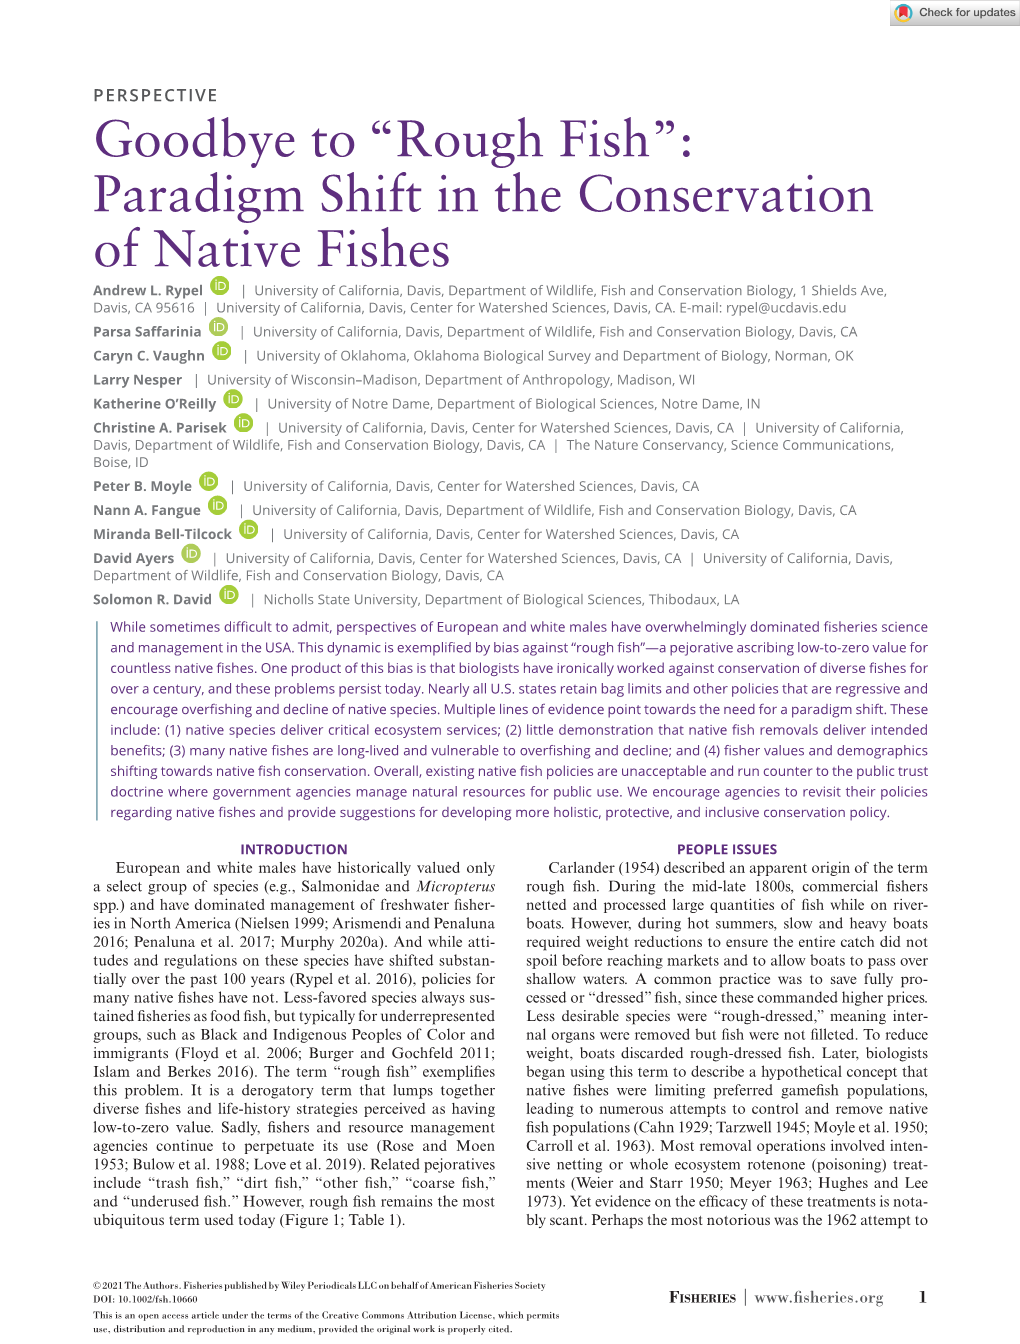 Rough Fish”: Paradigm Shift in the Conservation of Native Fishes Andrew L